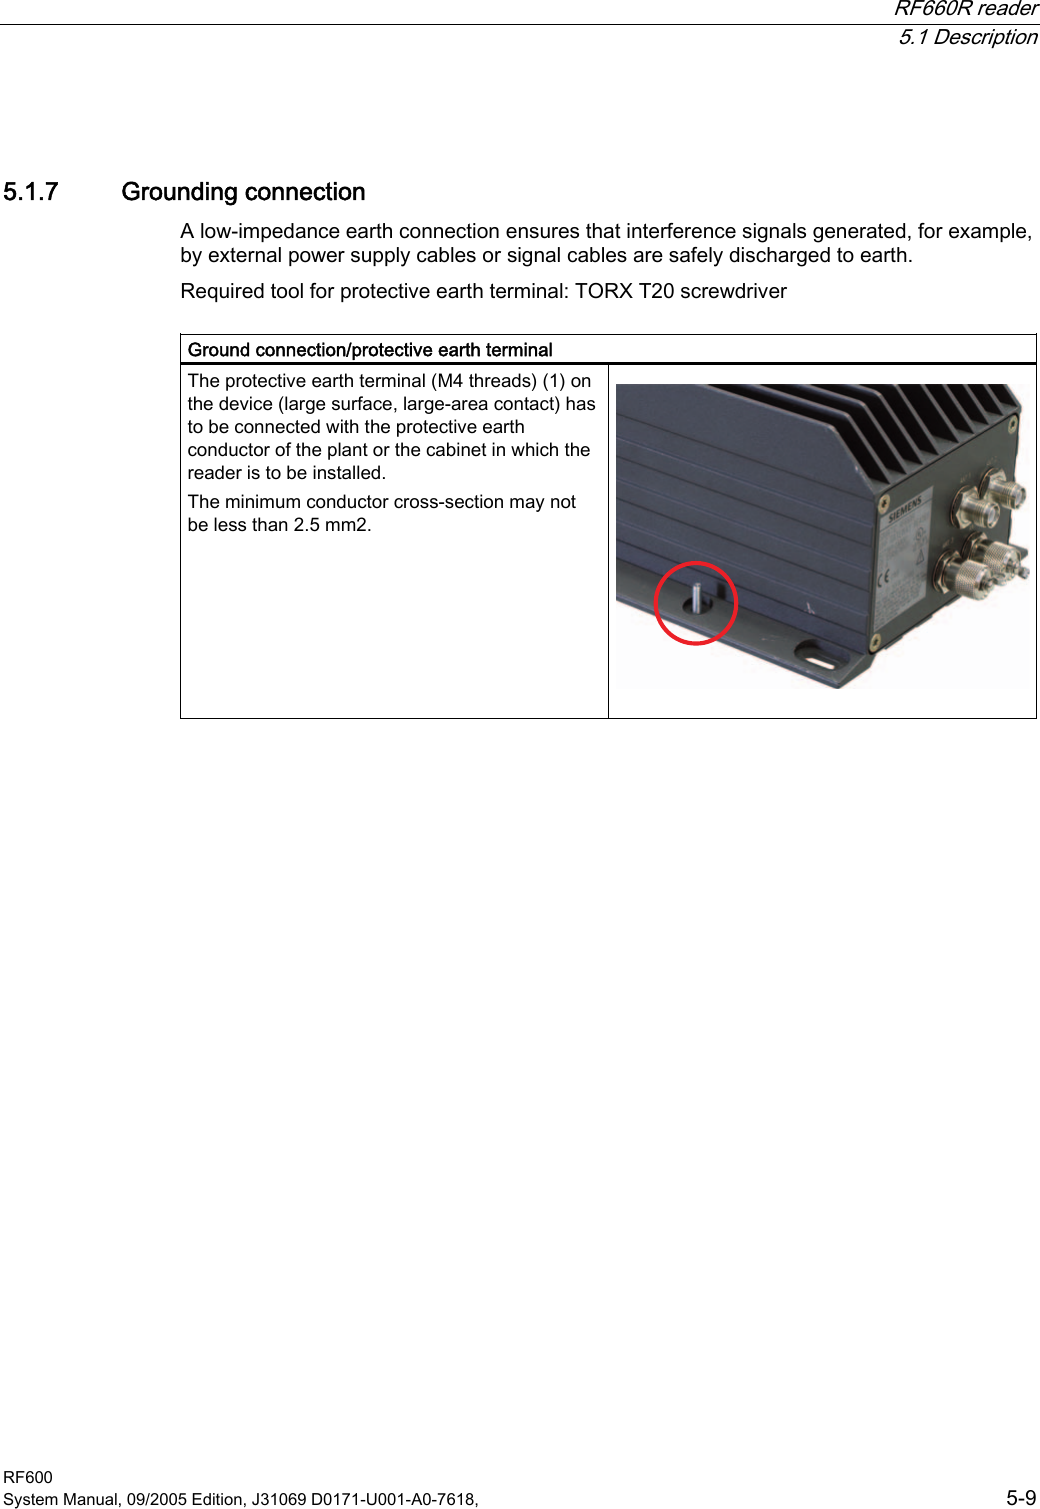  RF660R reader  5.1 Description RF600 System Manual, 09/2005 Edition, J31069 D0171-U001-A0-7618,    5-9 5.1.7 Grounding connection A low-impedance earth connection ensures that interference signals generated, for example, by external power supply cables or signal cables are safely discharged to earth.  Required tool for protective earth terminal: TORX T20 screwdriver  Ground connection/protective earth terminal The protective earth terminal (M4 threads) (1) on the device (large surface, large-area contact) has to be connected with the protective earth conductor of the plant or the cabinet in which the reader is to be installed.  The minimum conductor cross-section may not be less than 2.5 mm2.      